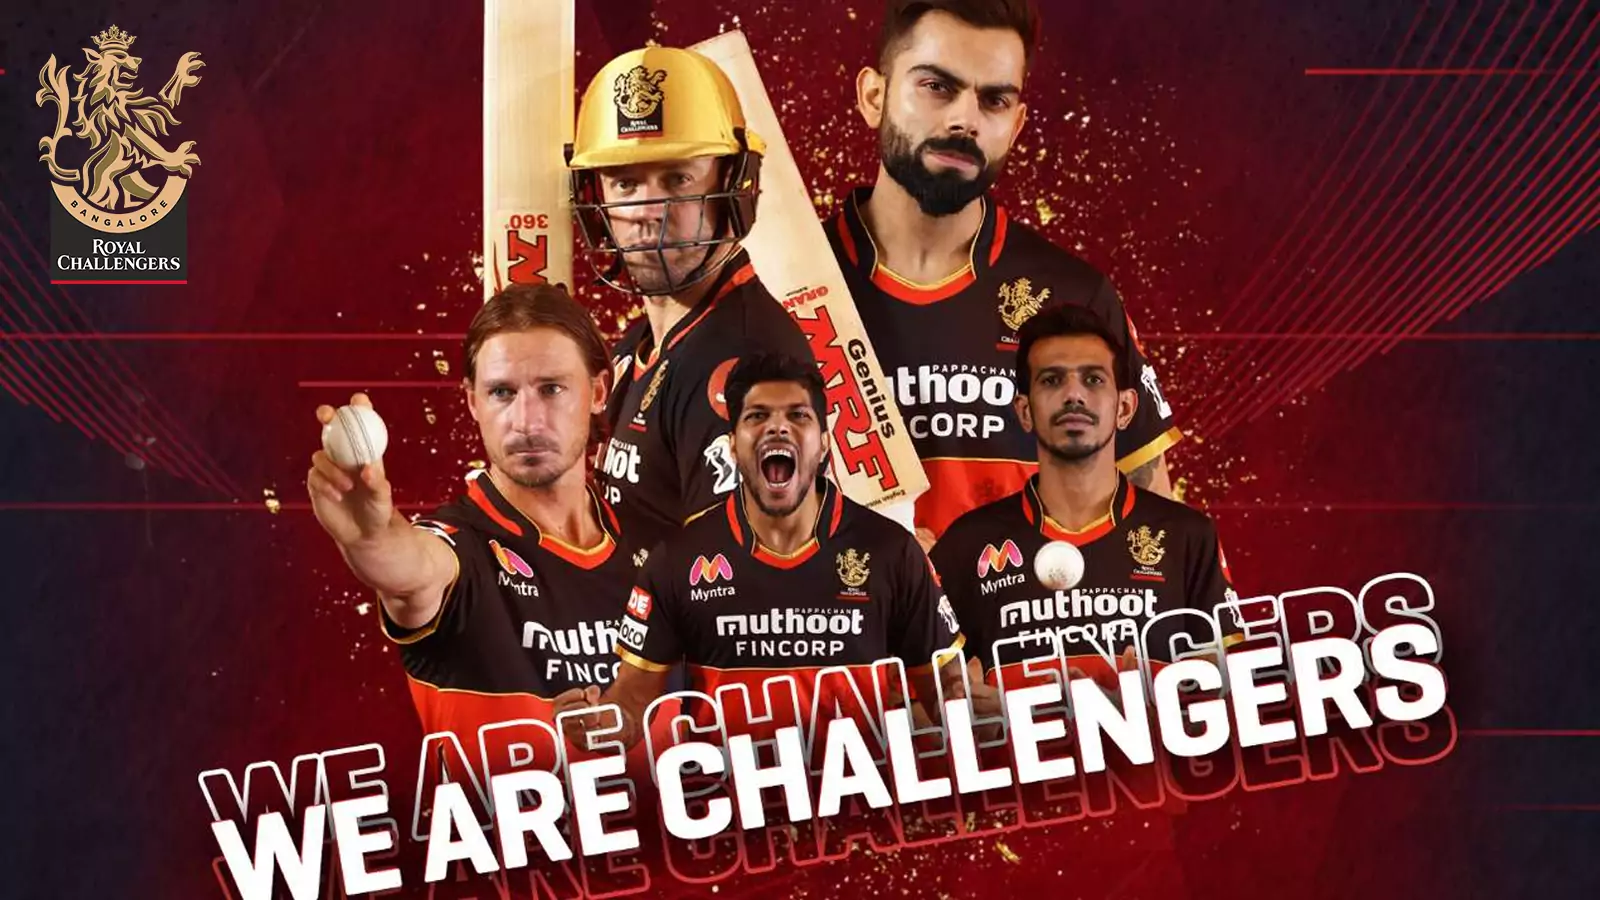 Place bets on Royal Challengers Bangalore team and try to win a lot during the IPL events.